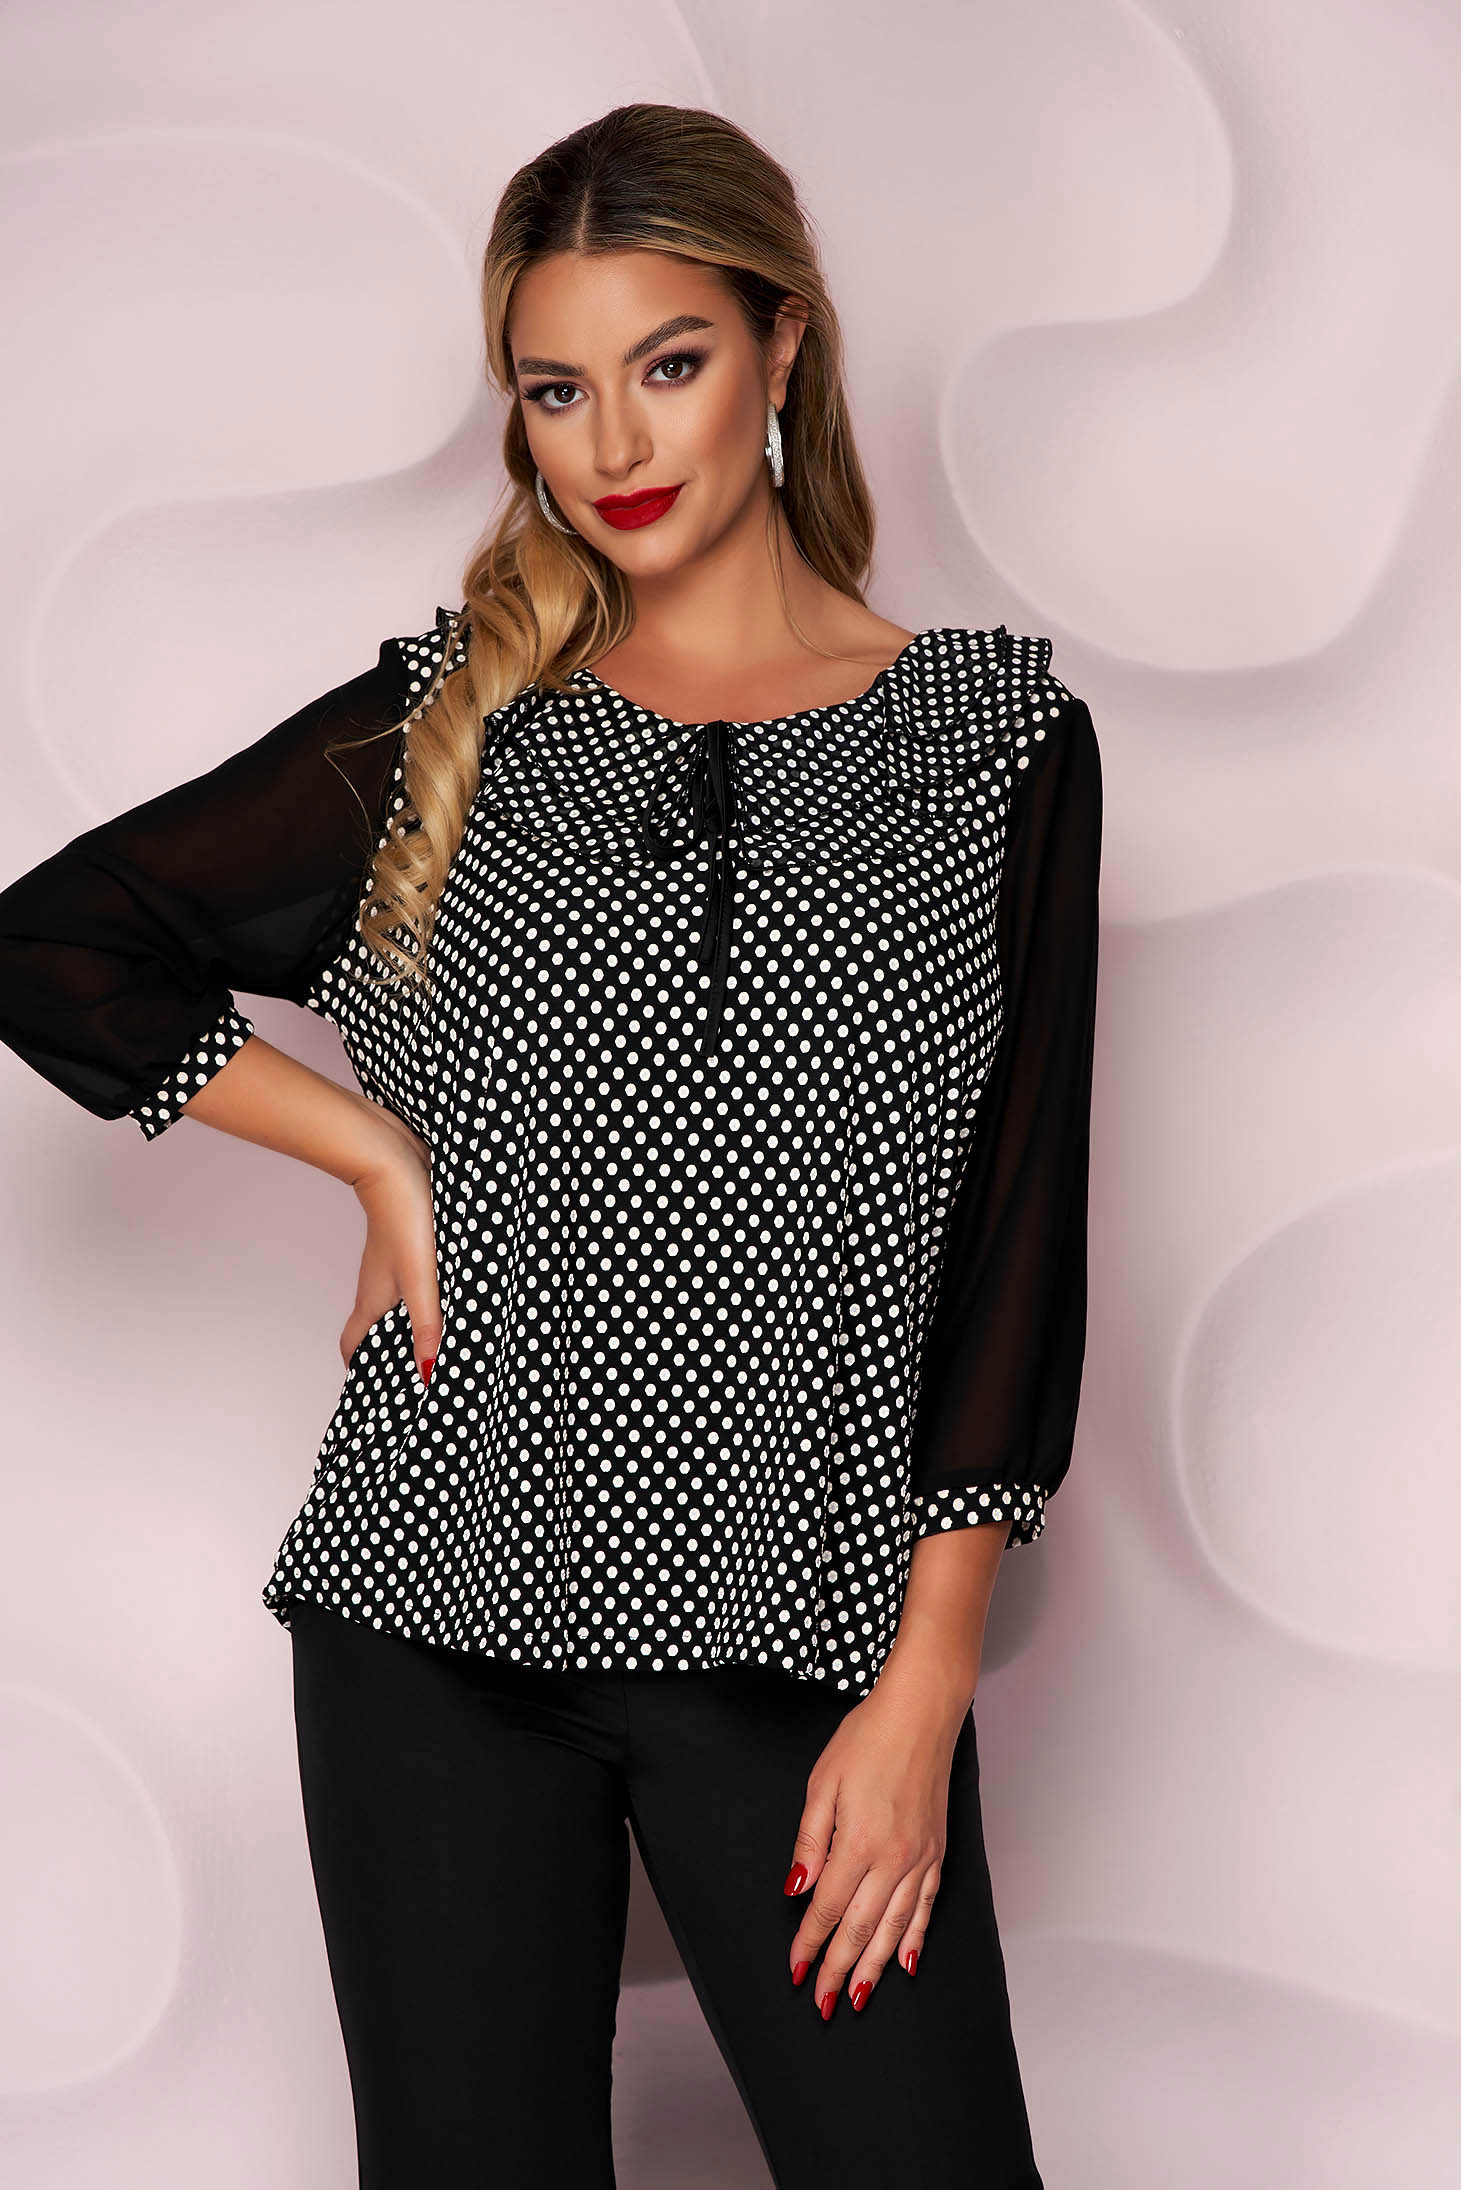 Women`s blouse loose fit office with veil sleeves thin fabric from elastic fabric